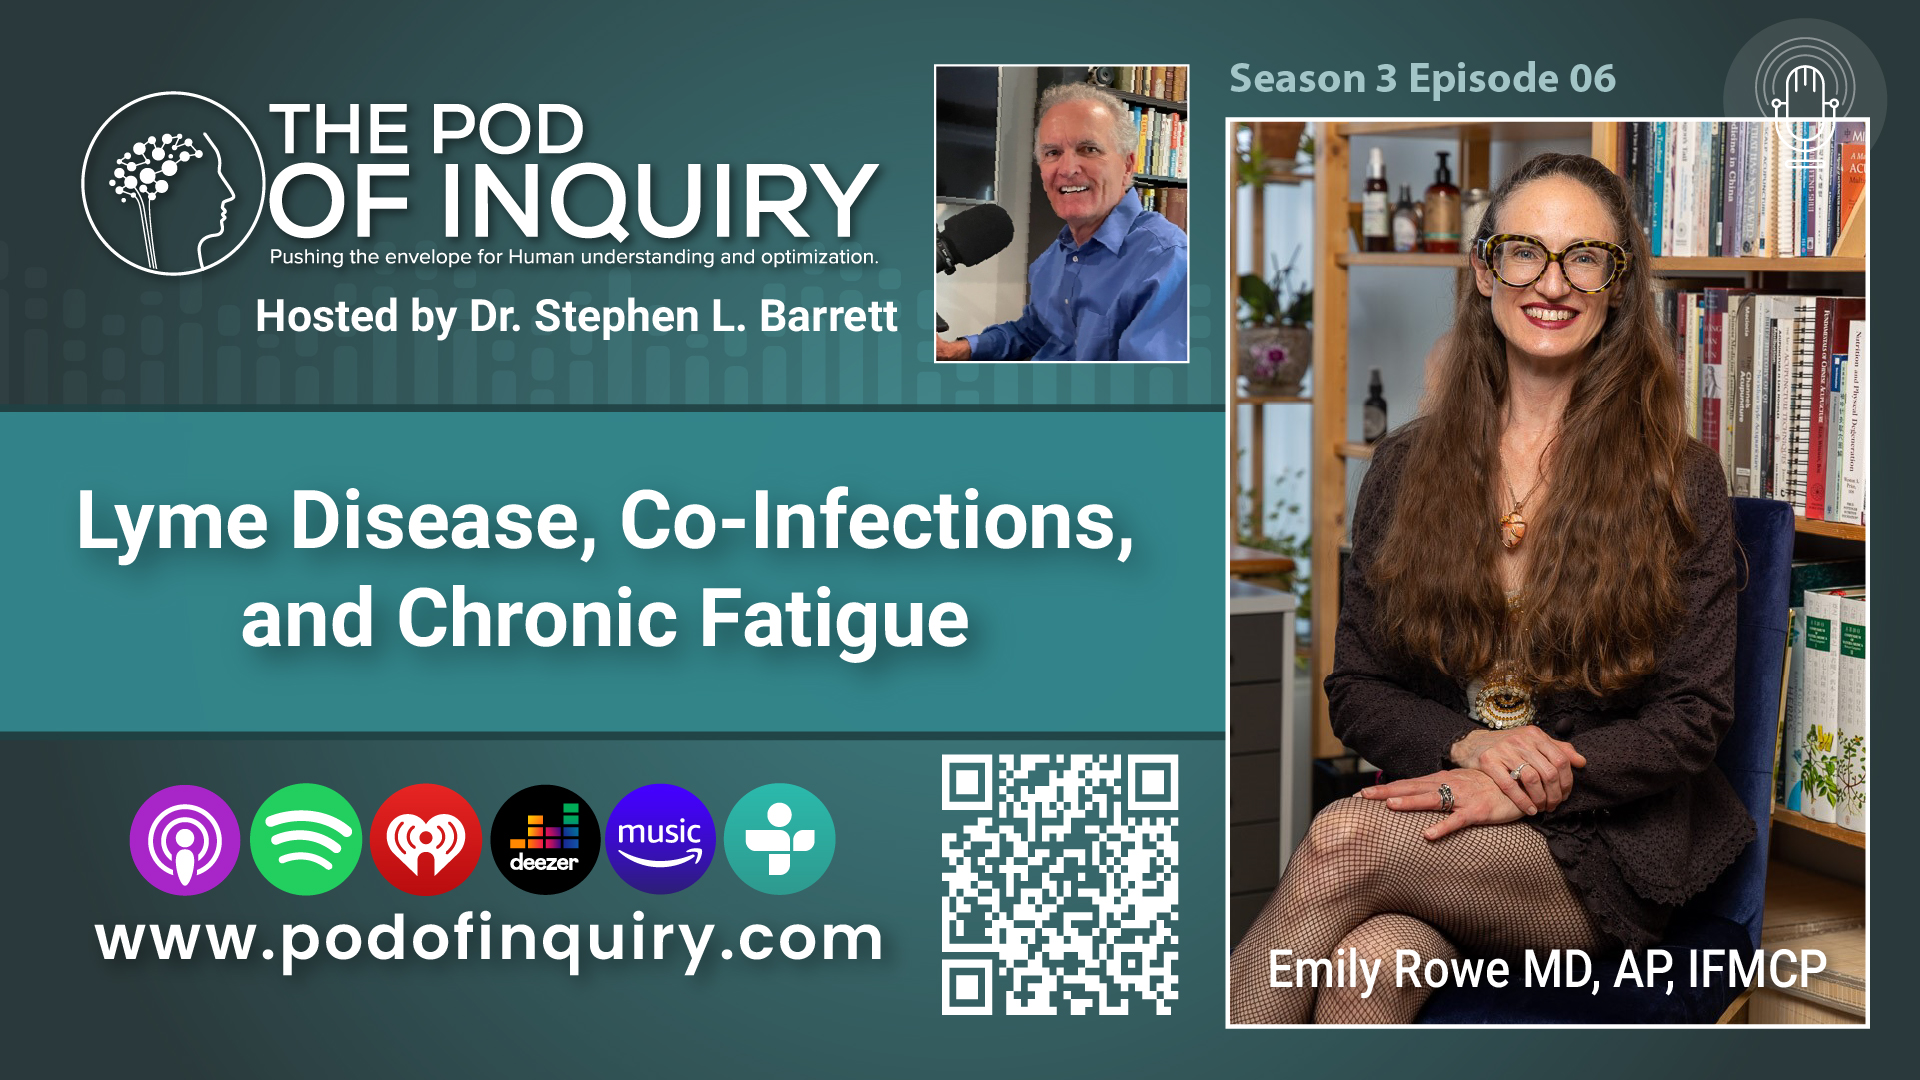 Lyme Disease, Co-Infections, and Chronic Fatigue - Emily Rowe MD, AP, IFMCP